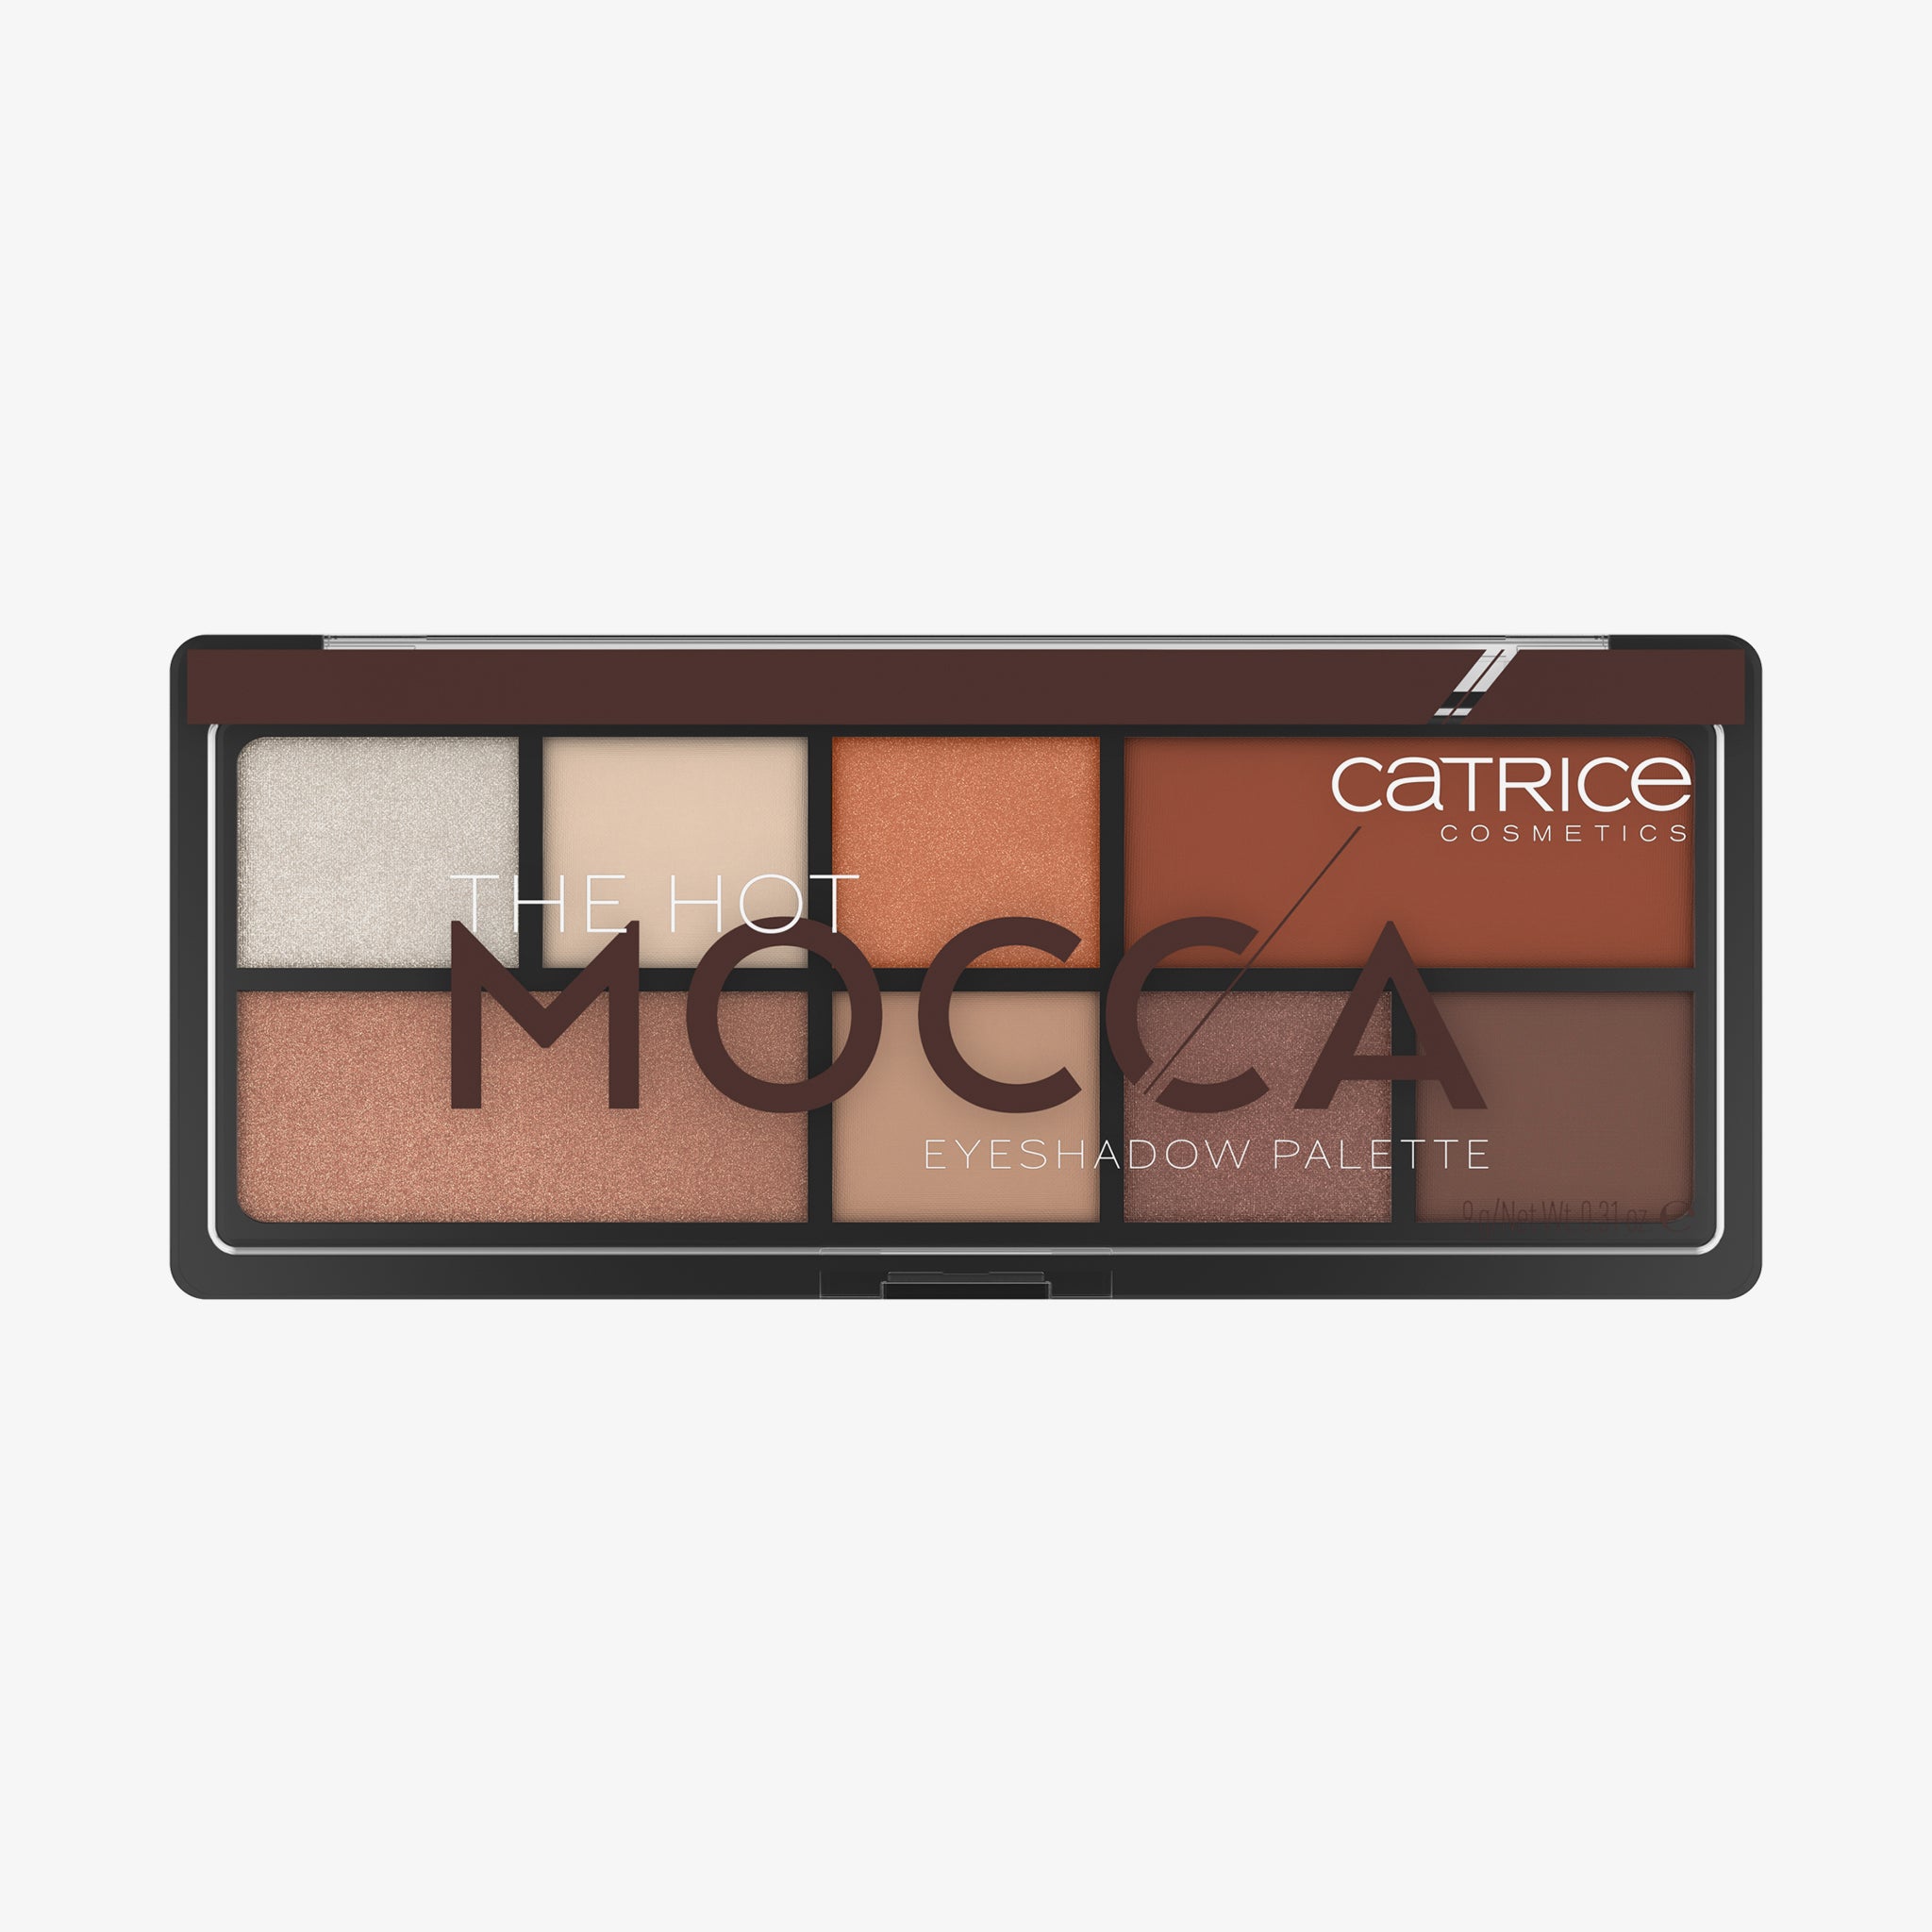 The Hot Mocca Eyeshadow Palette Catrice Cosmetics | PURISH